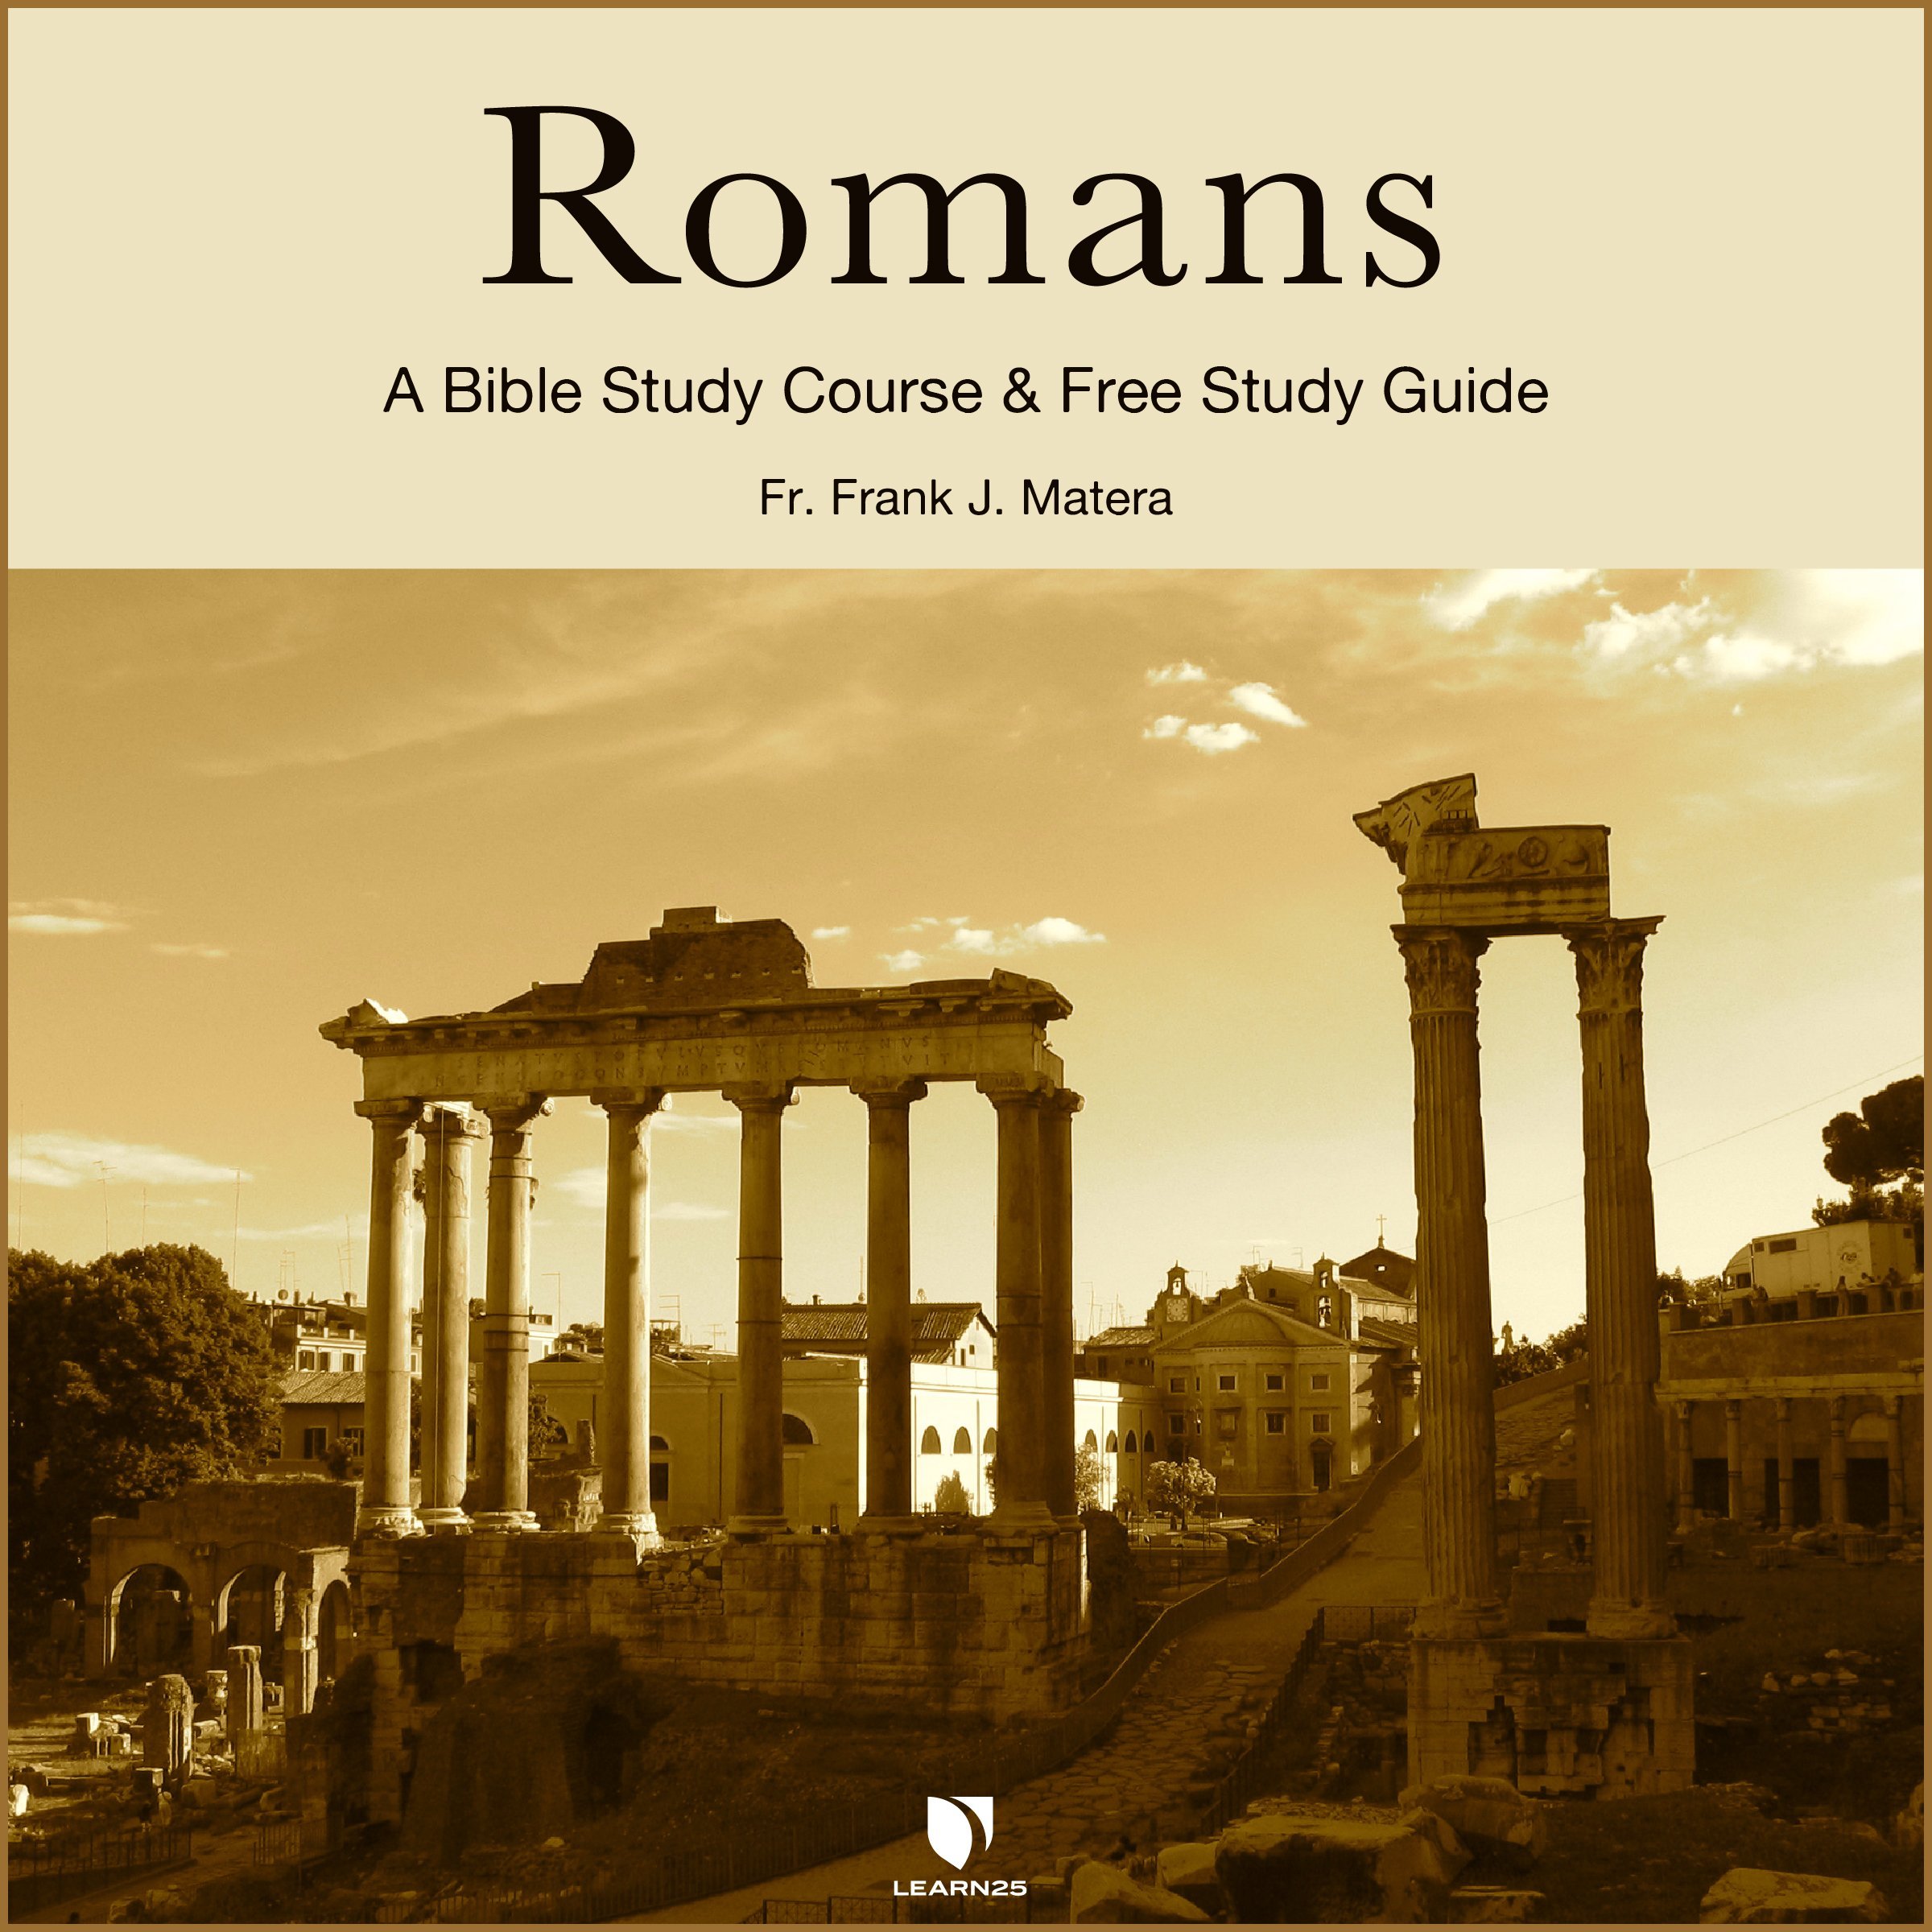 how to study the book of romans in the bible